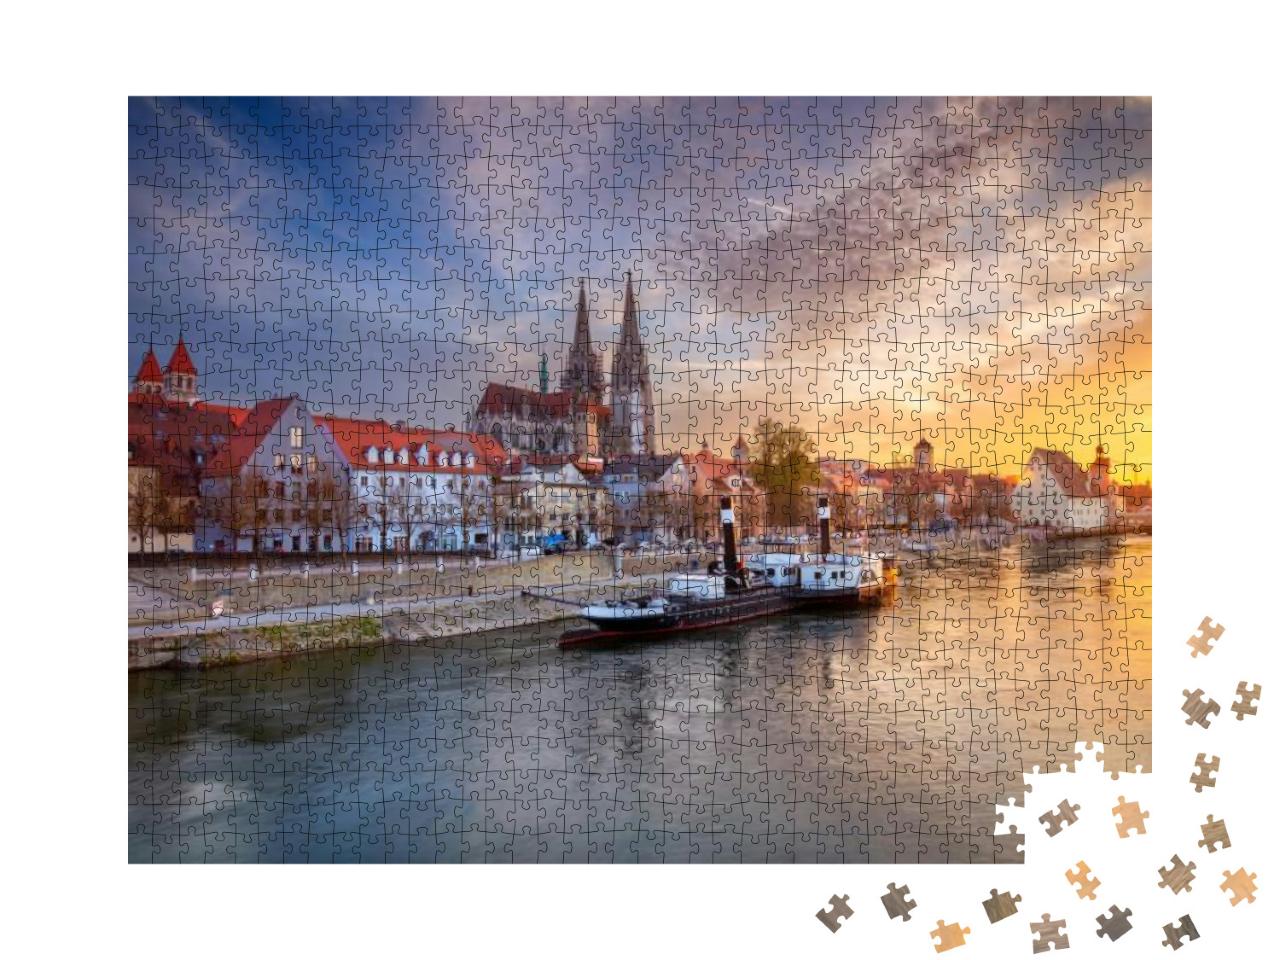 Regensburg. Cityscape Image of Regensburg, Germany During... Jigsaw Puzzle with 1000 pieces